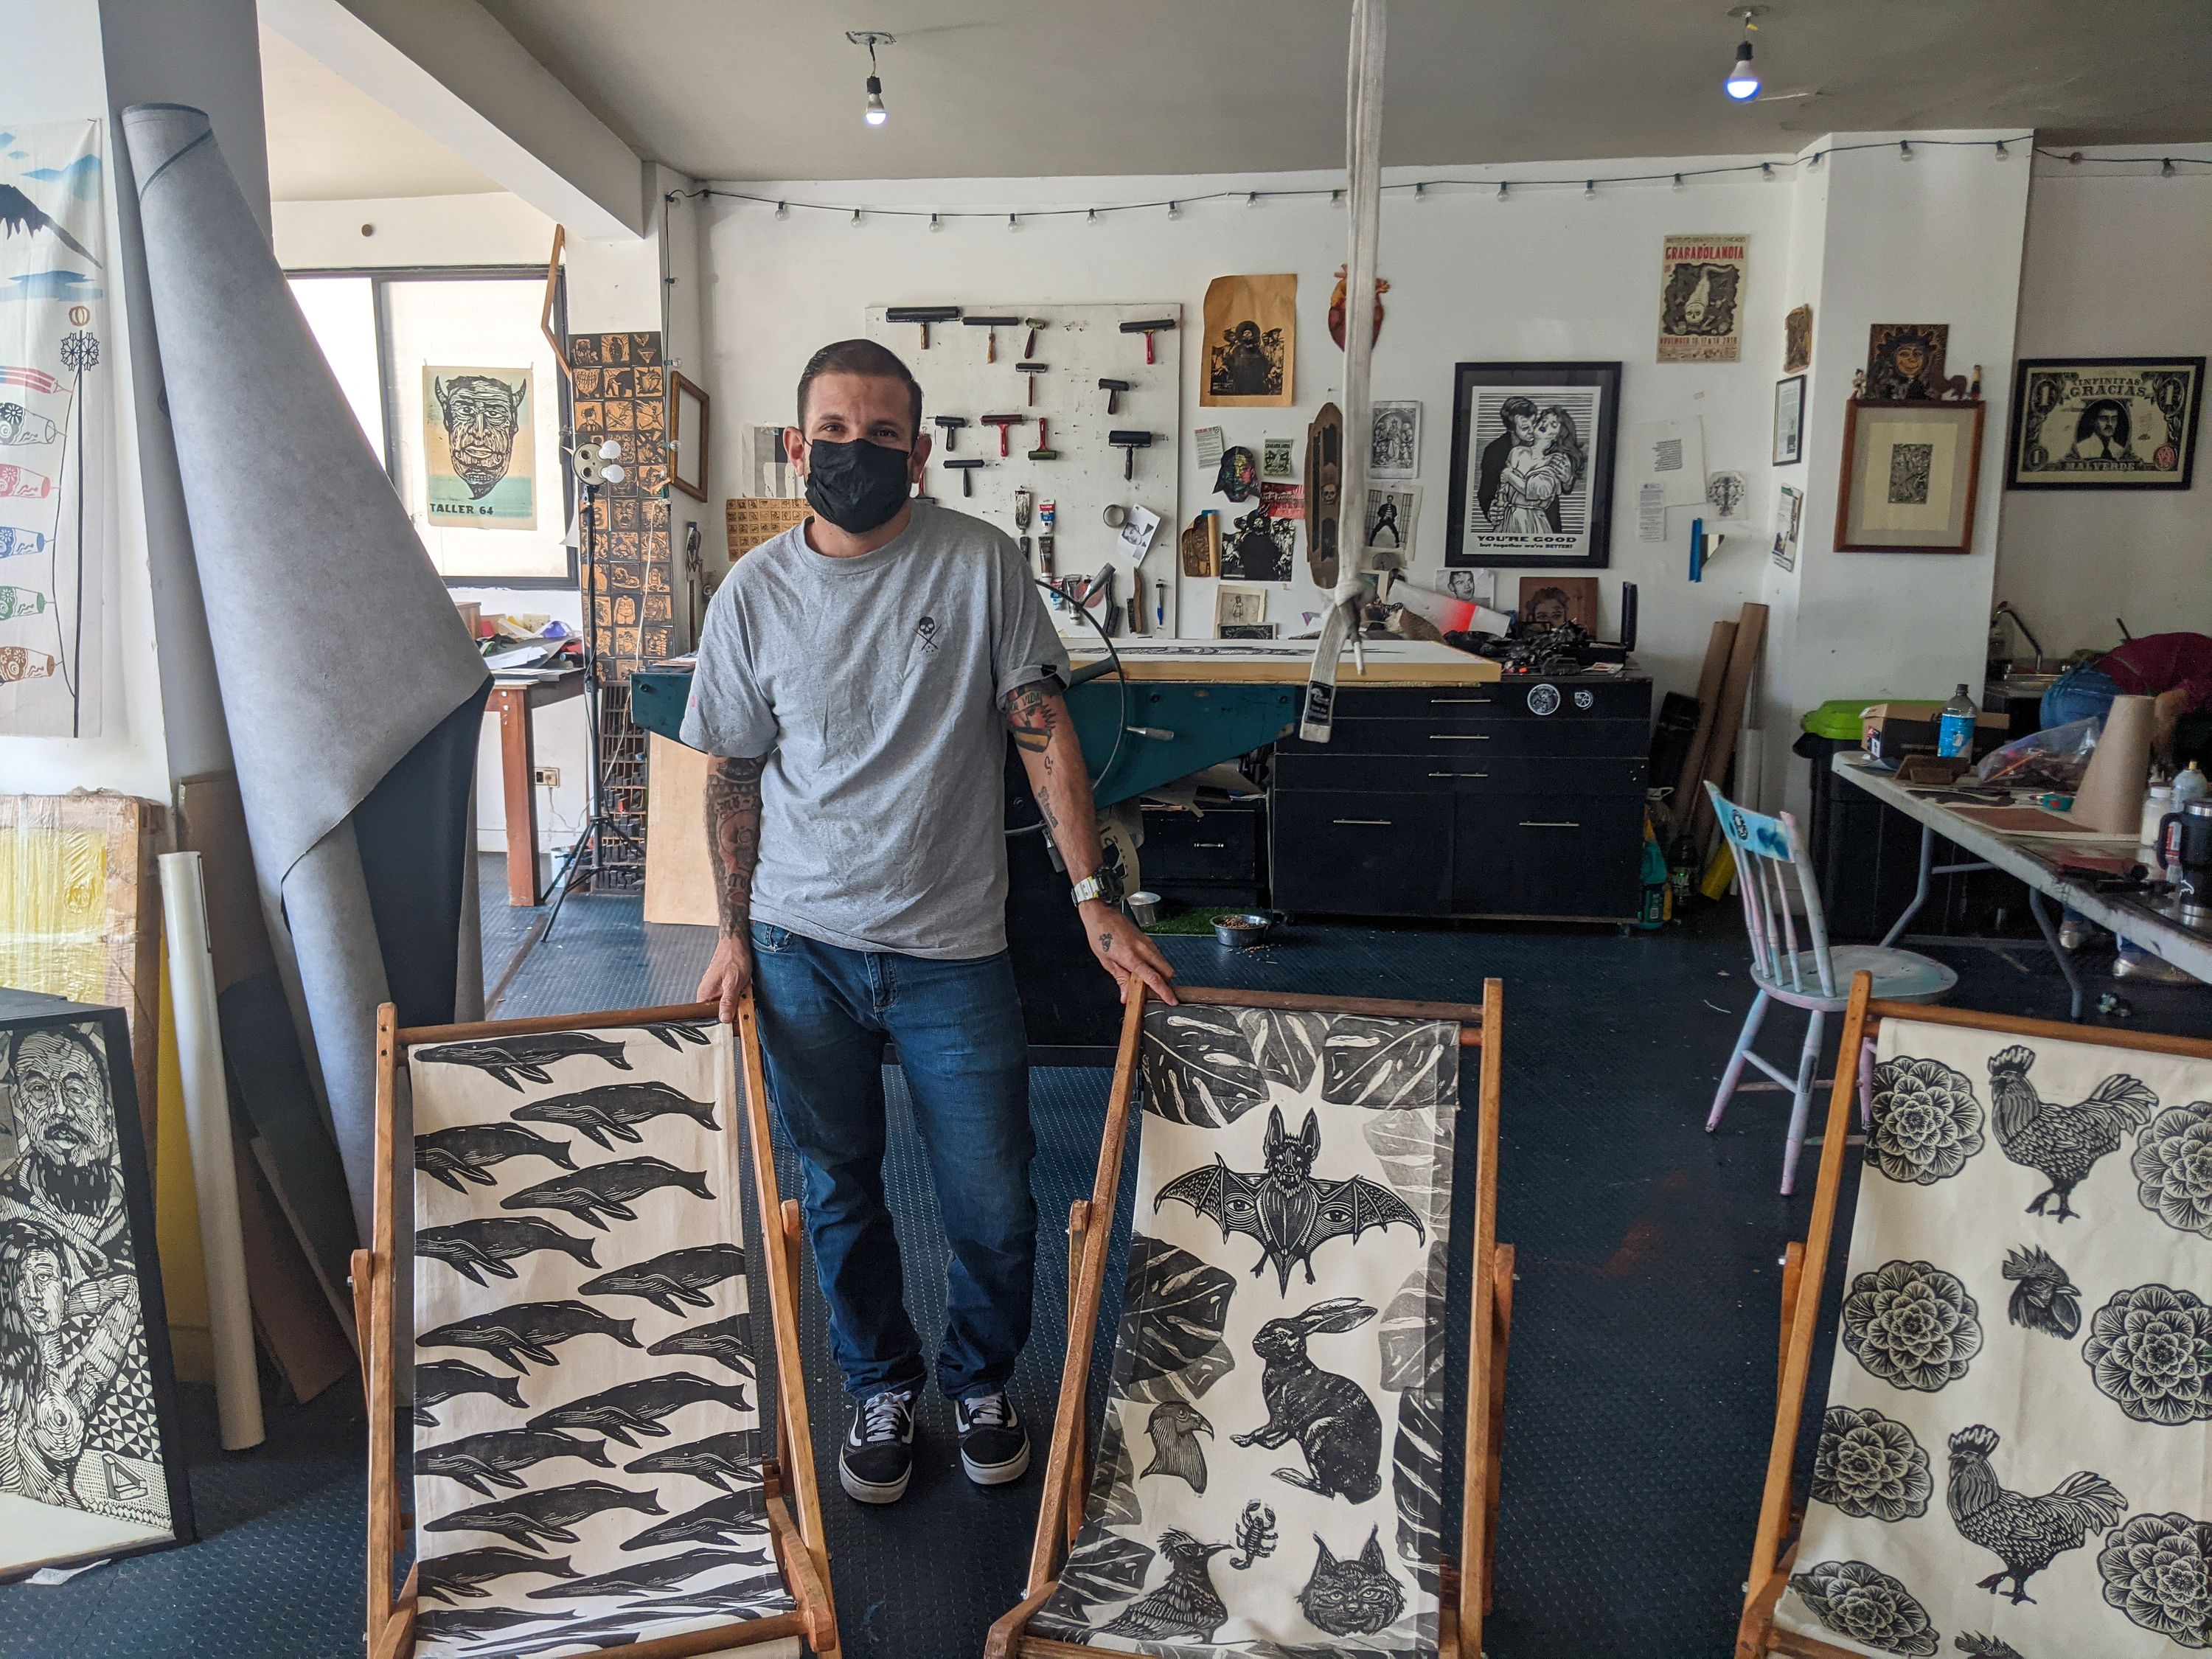 Daniel Amora in his studio. He designed and printed the fabrics for the lounge chairs, whose bodies were made locally by a woodworking family.